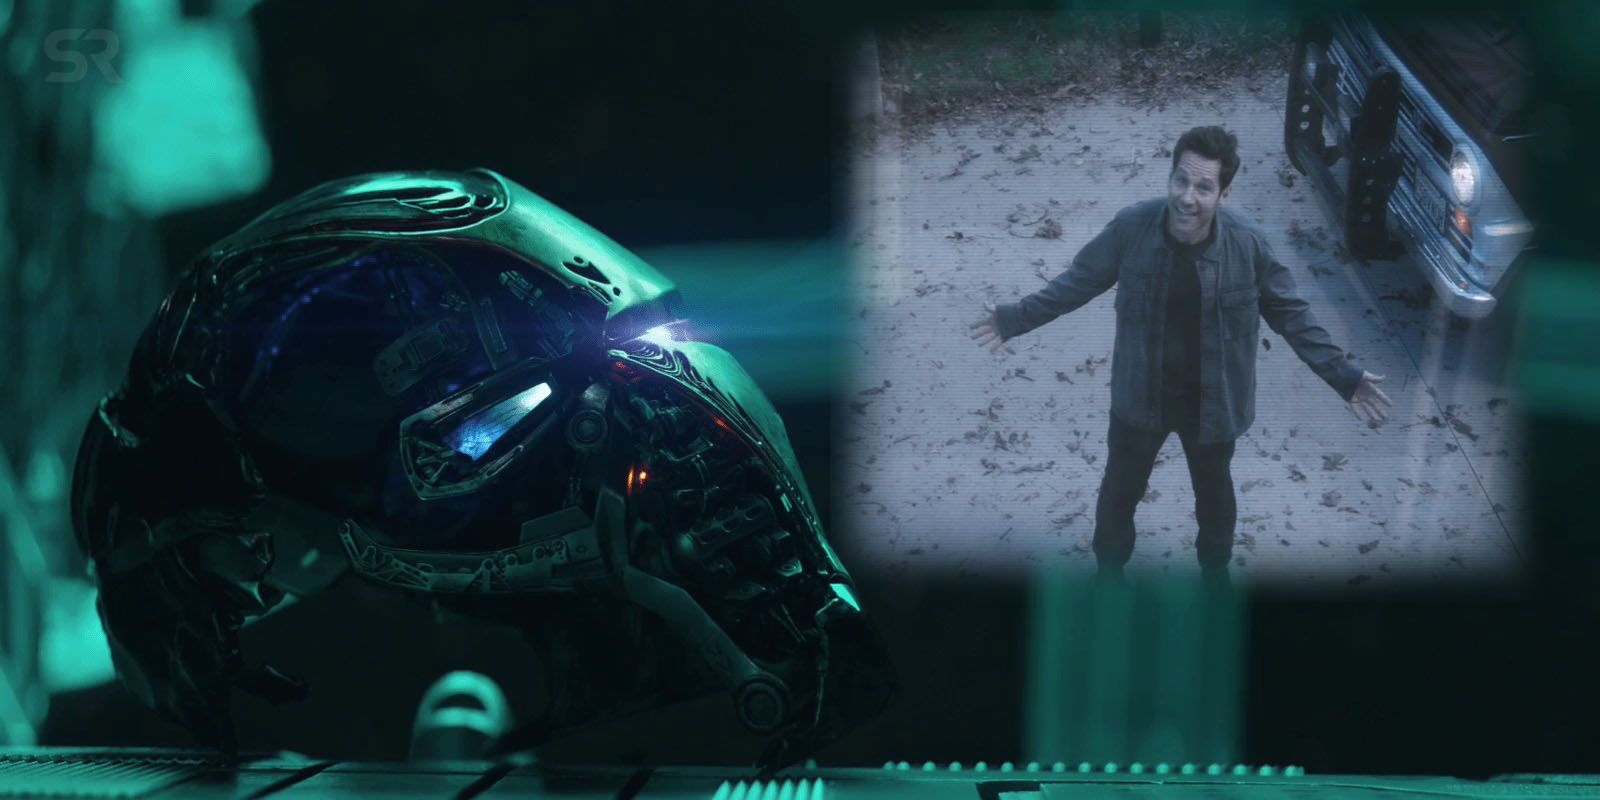 When Will The Next Avengers: Endgame Trailer Release? [UPDATED]